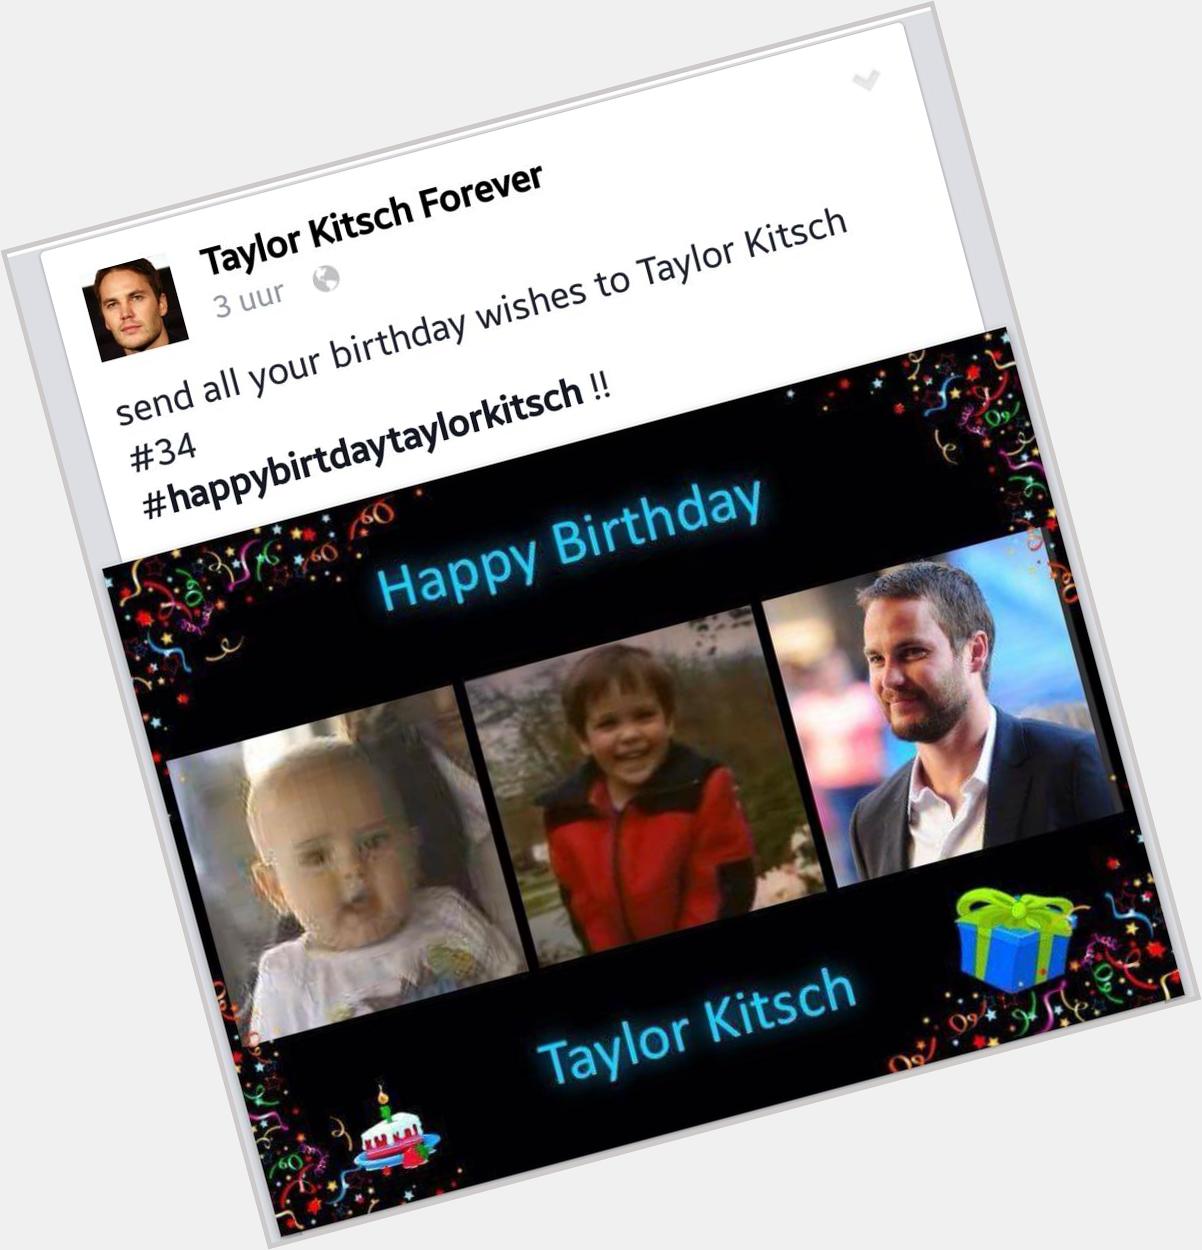 Happy Birthday Taylor Kitsch.
Many happy returns my Jeddak.
We all wait for you in the Sequel.    